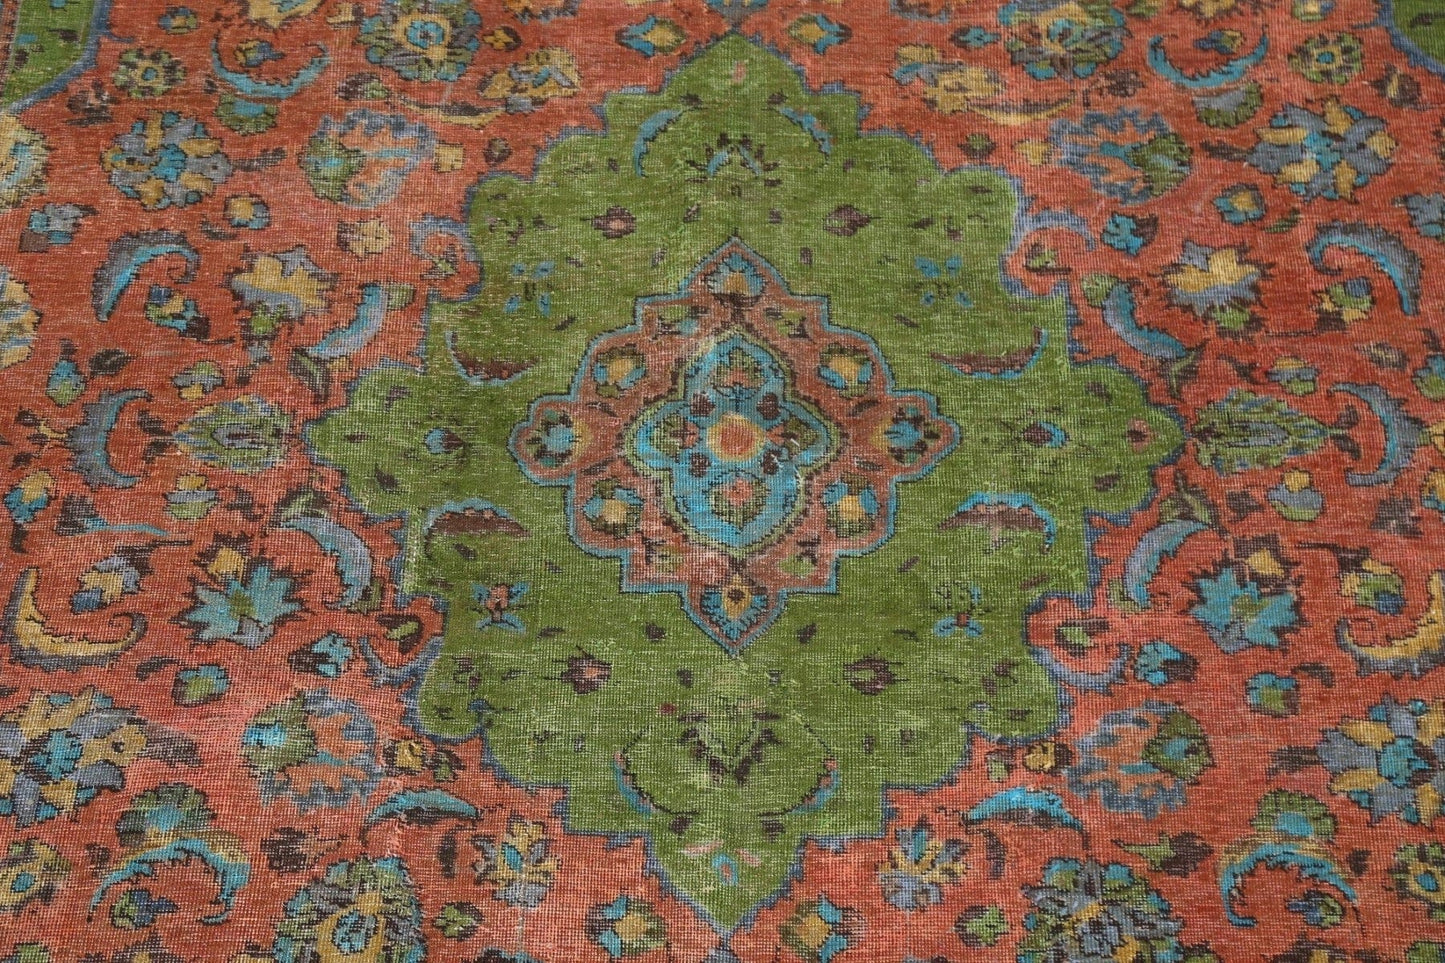 Antique Distressed Over-Dye Mashad Persian Area Rug 8x11